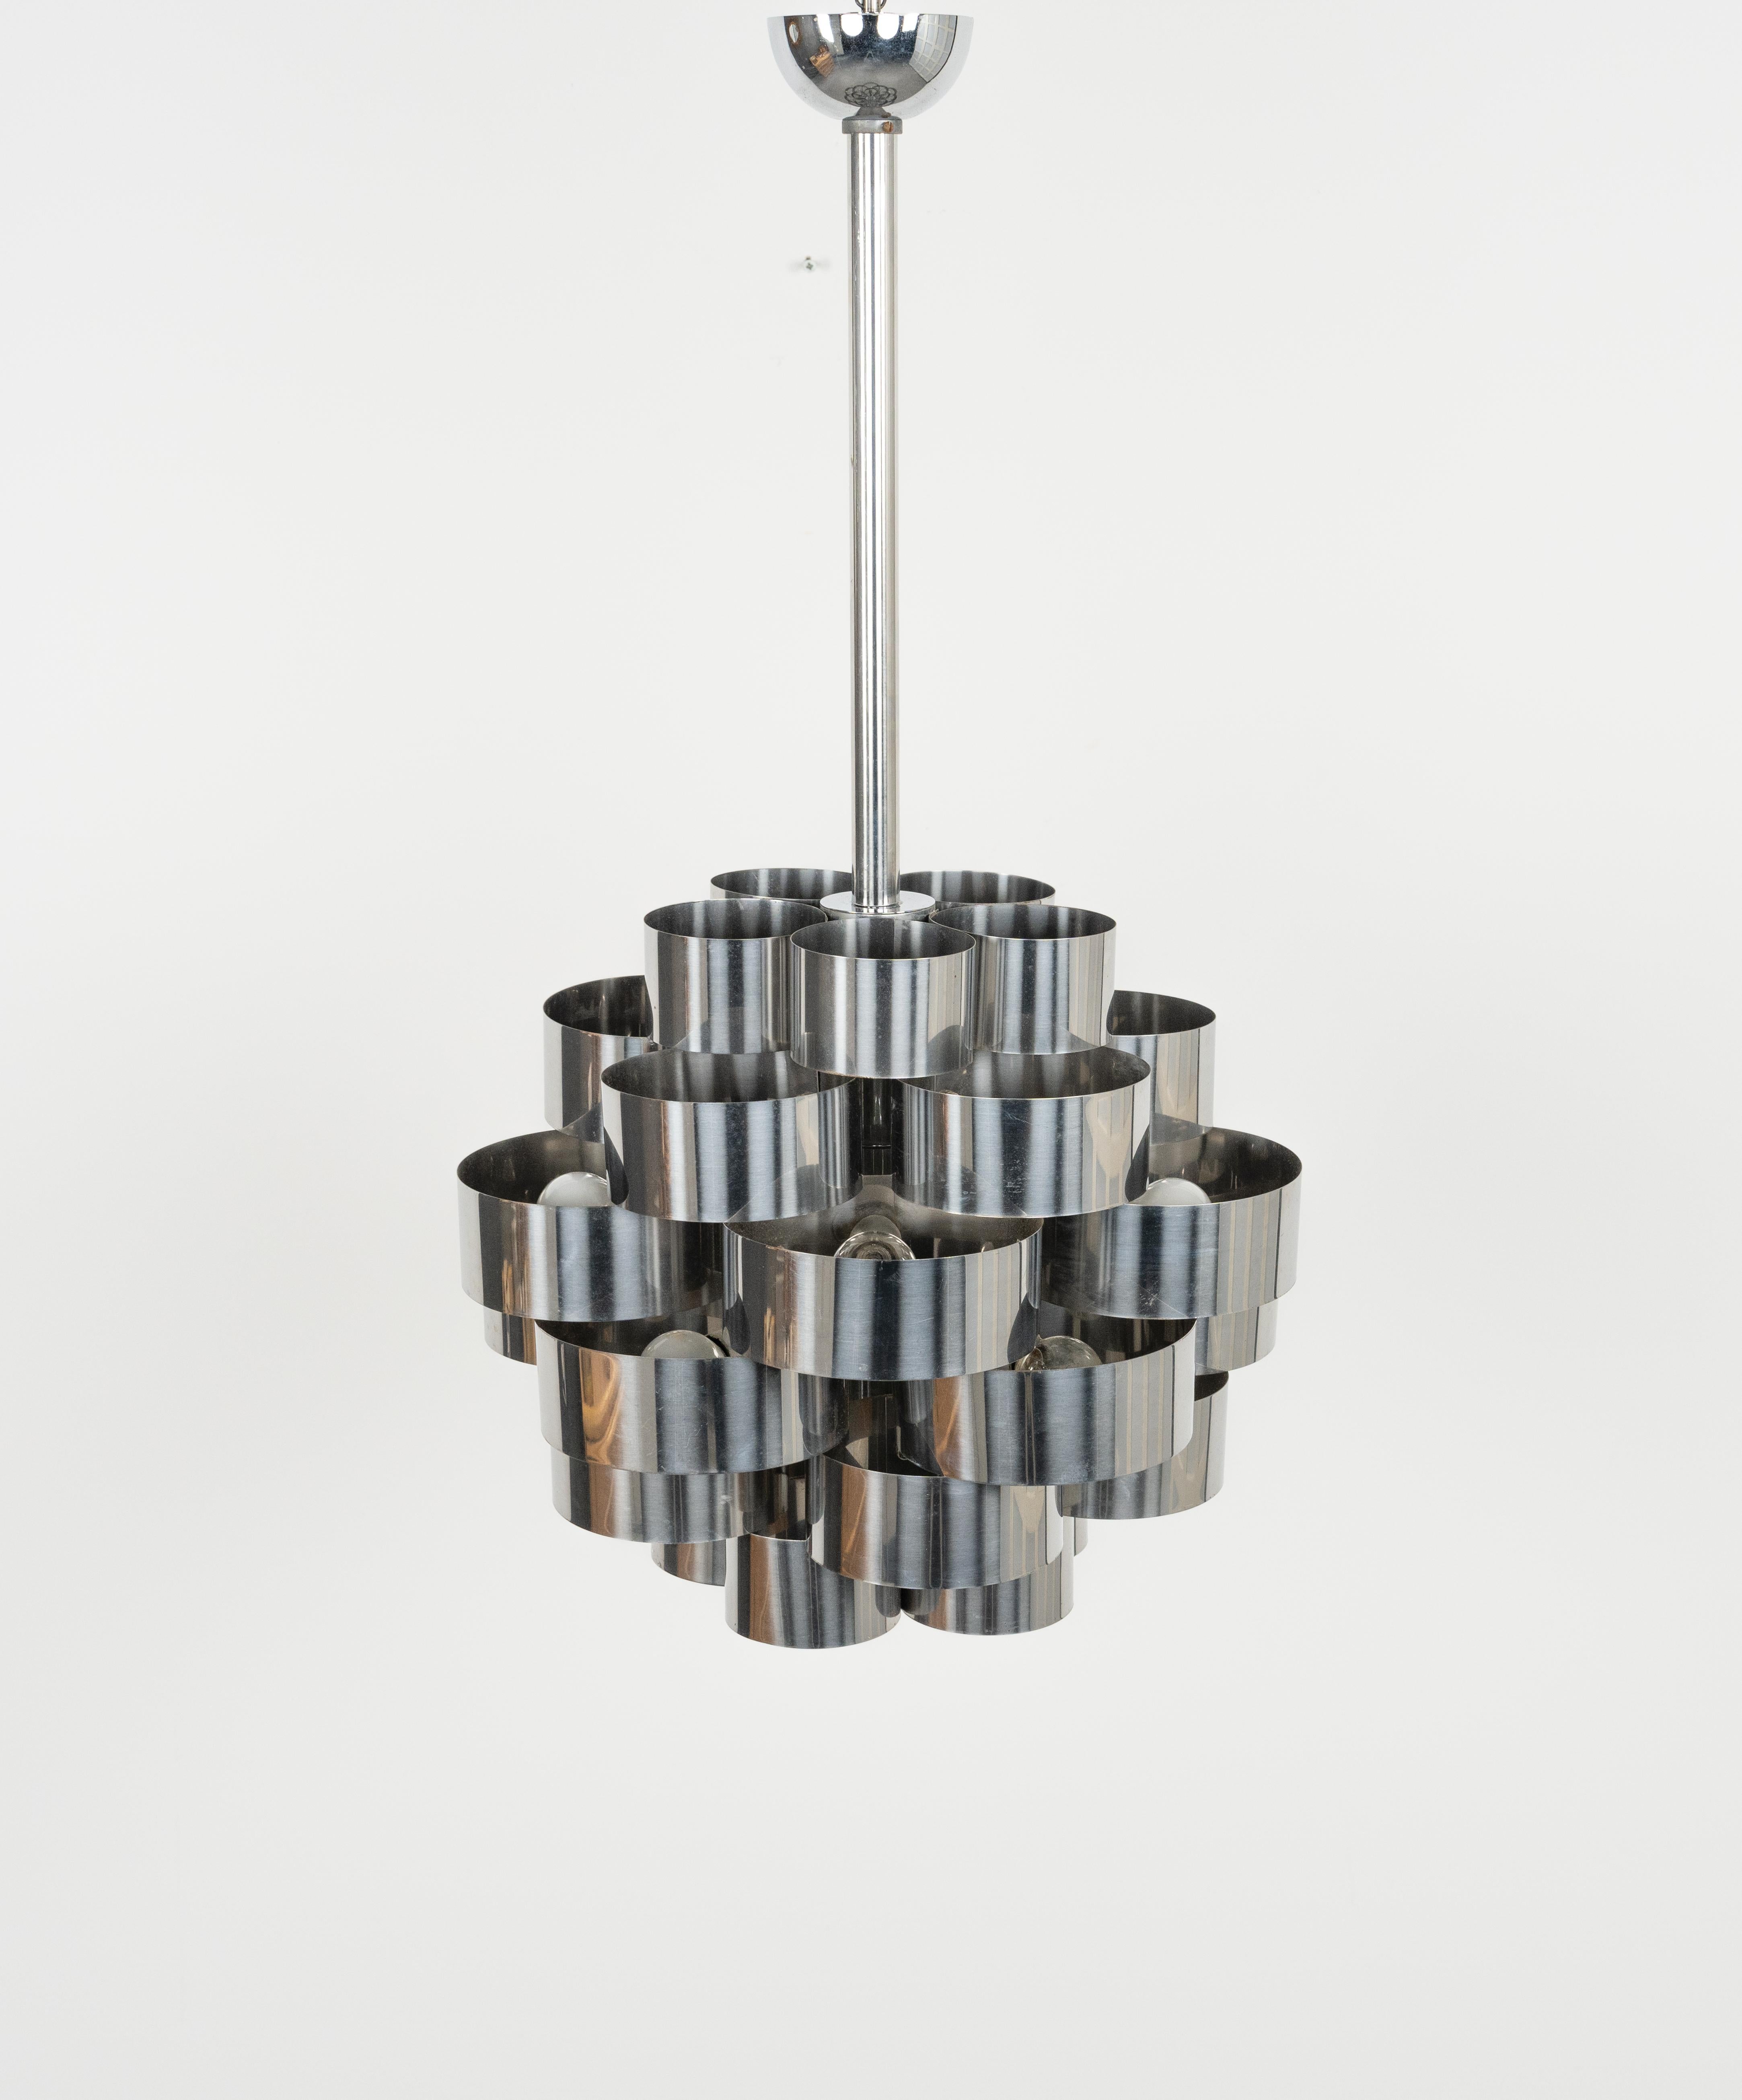 Midcentury Chandelier Aluminum and Steel by Max Sauze for Sciolari, Italy 1970s For Sale 4